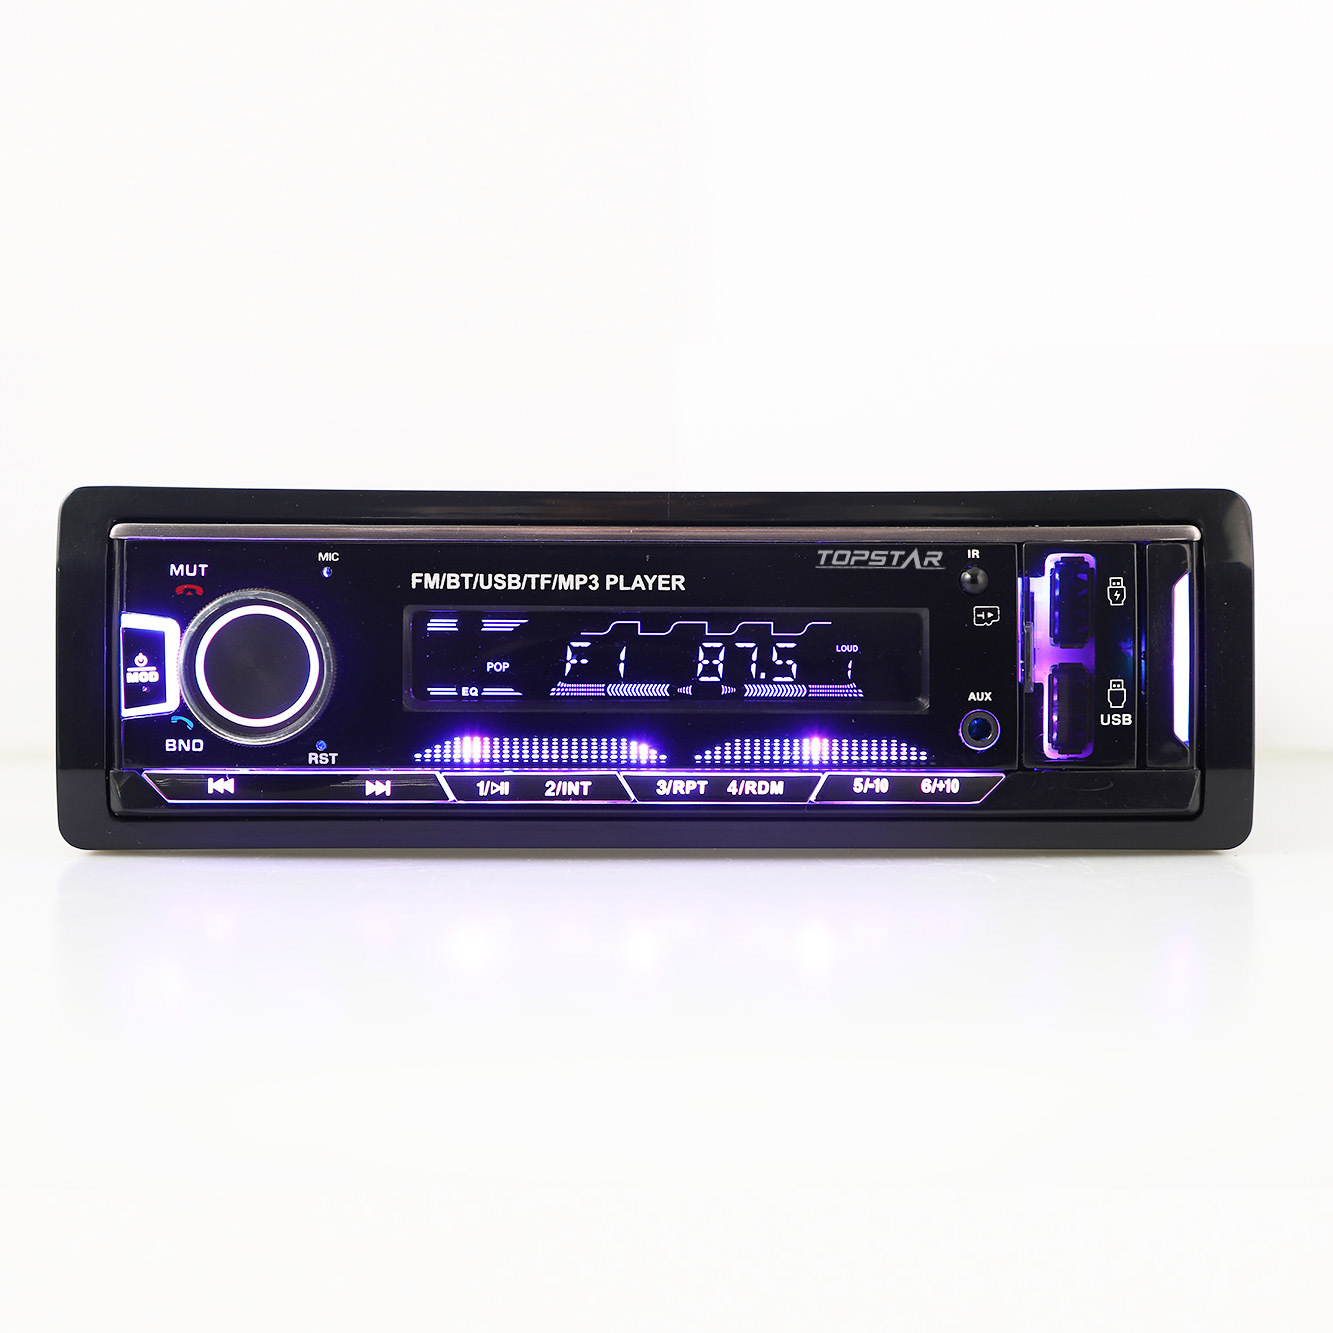 One DIN Car Player Audio Ts-9916